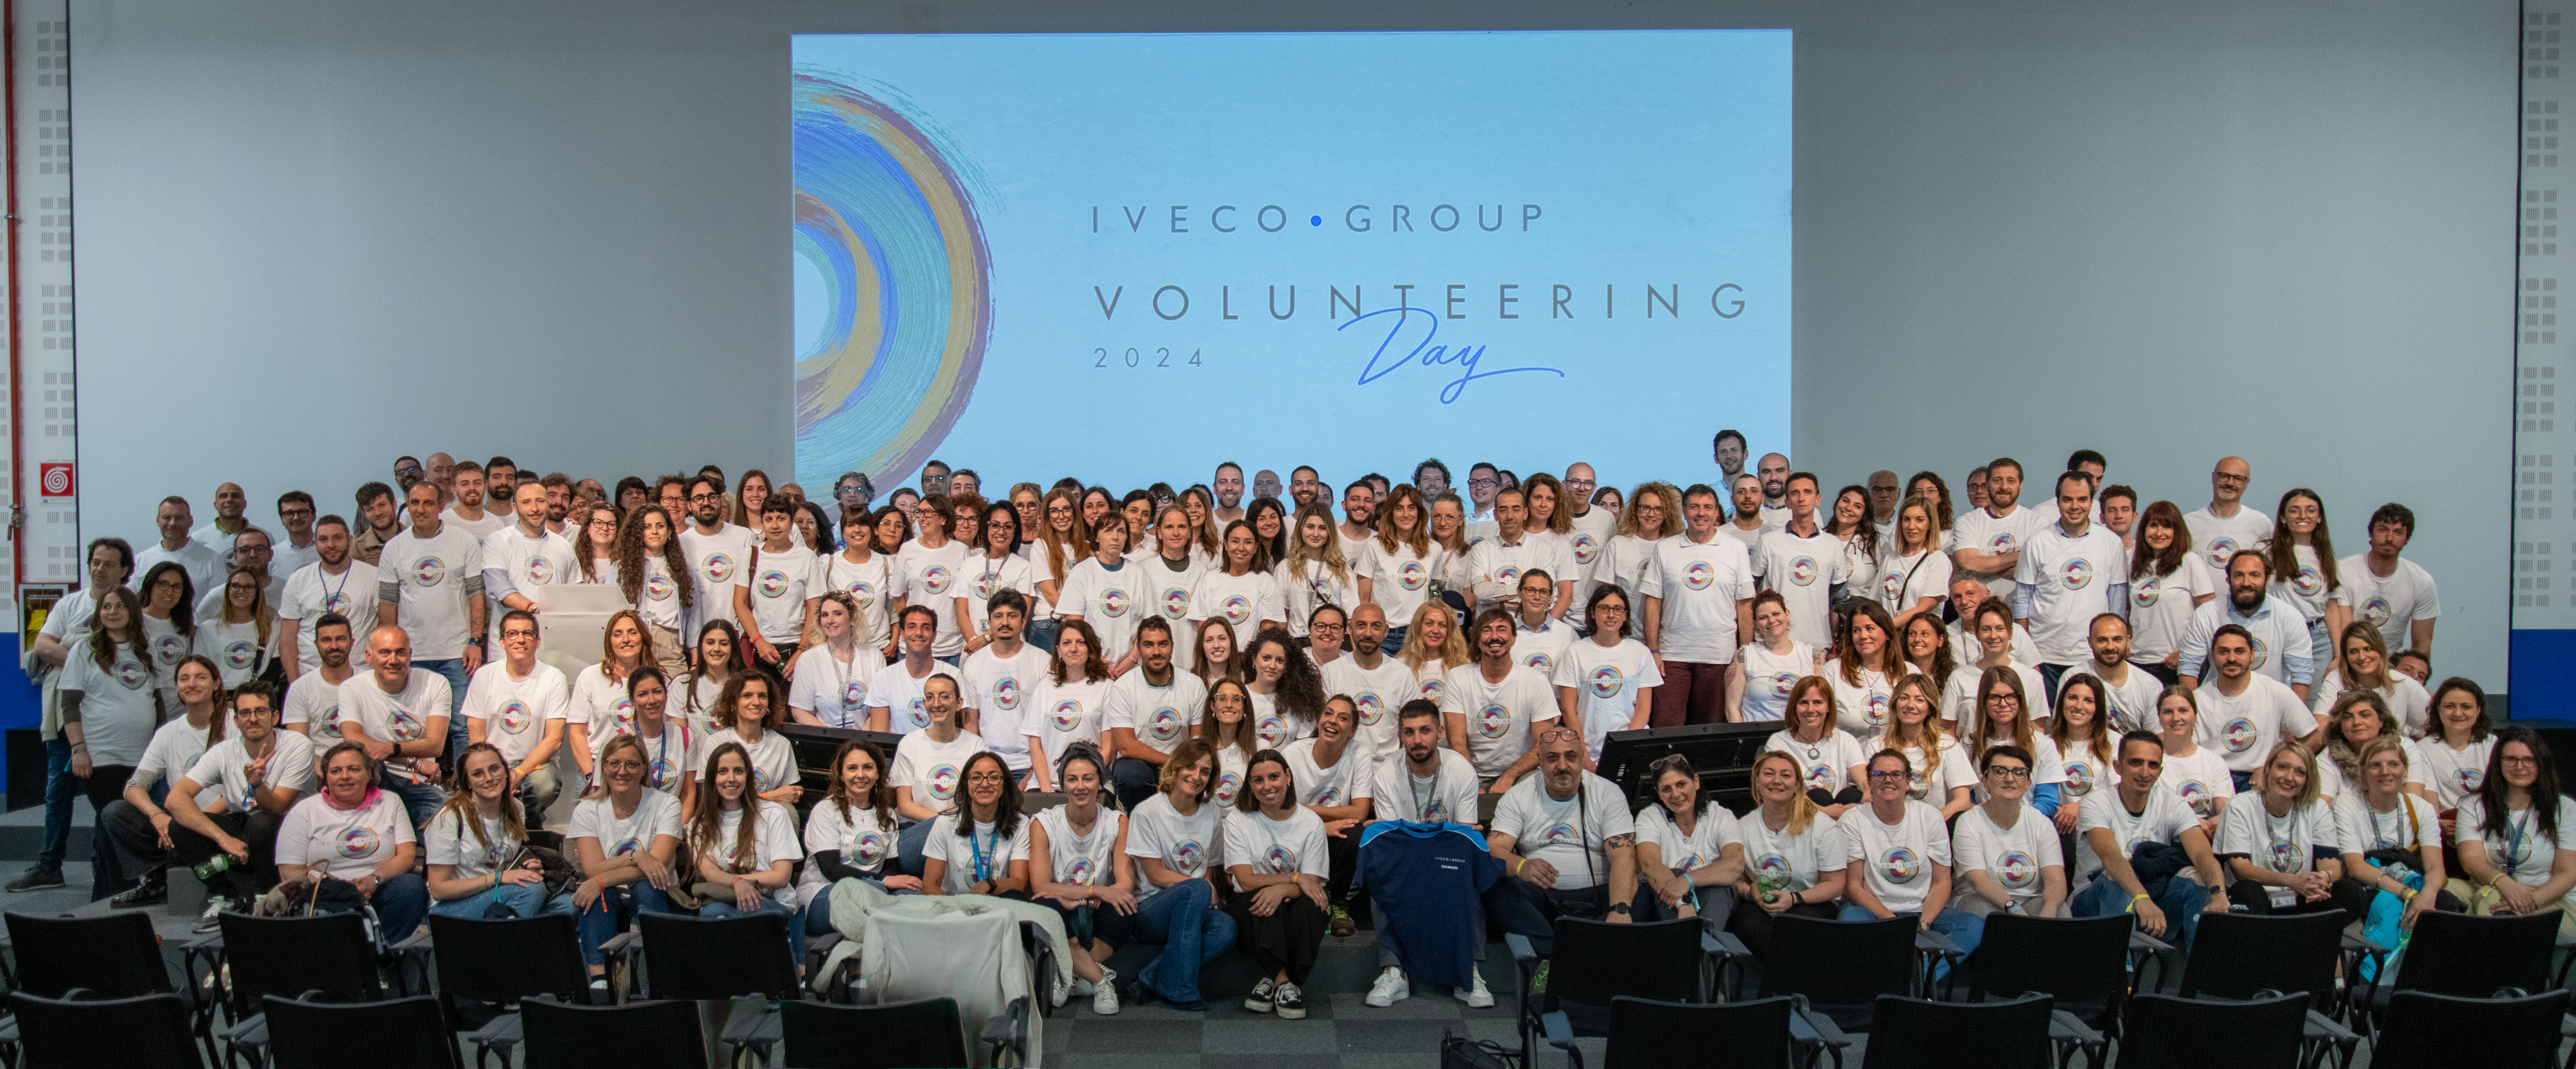 Iveco_Group_Volunteering_Day_Turin